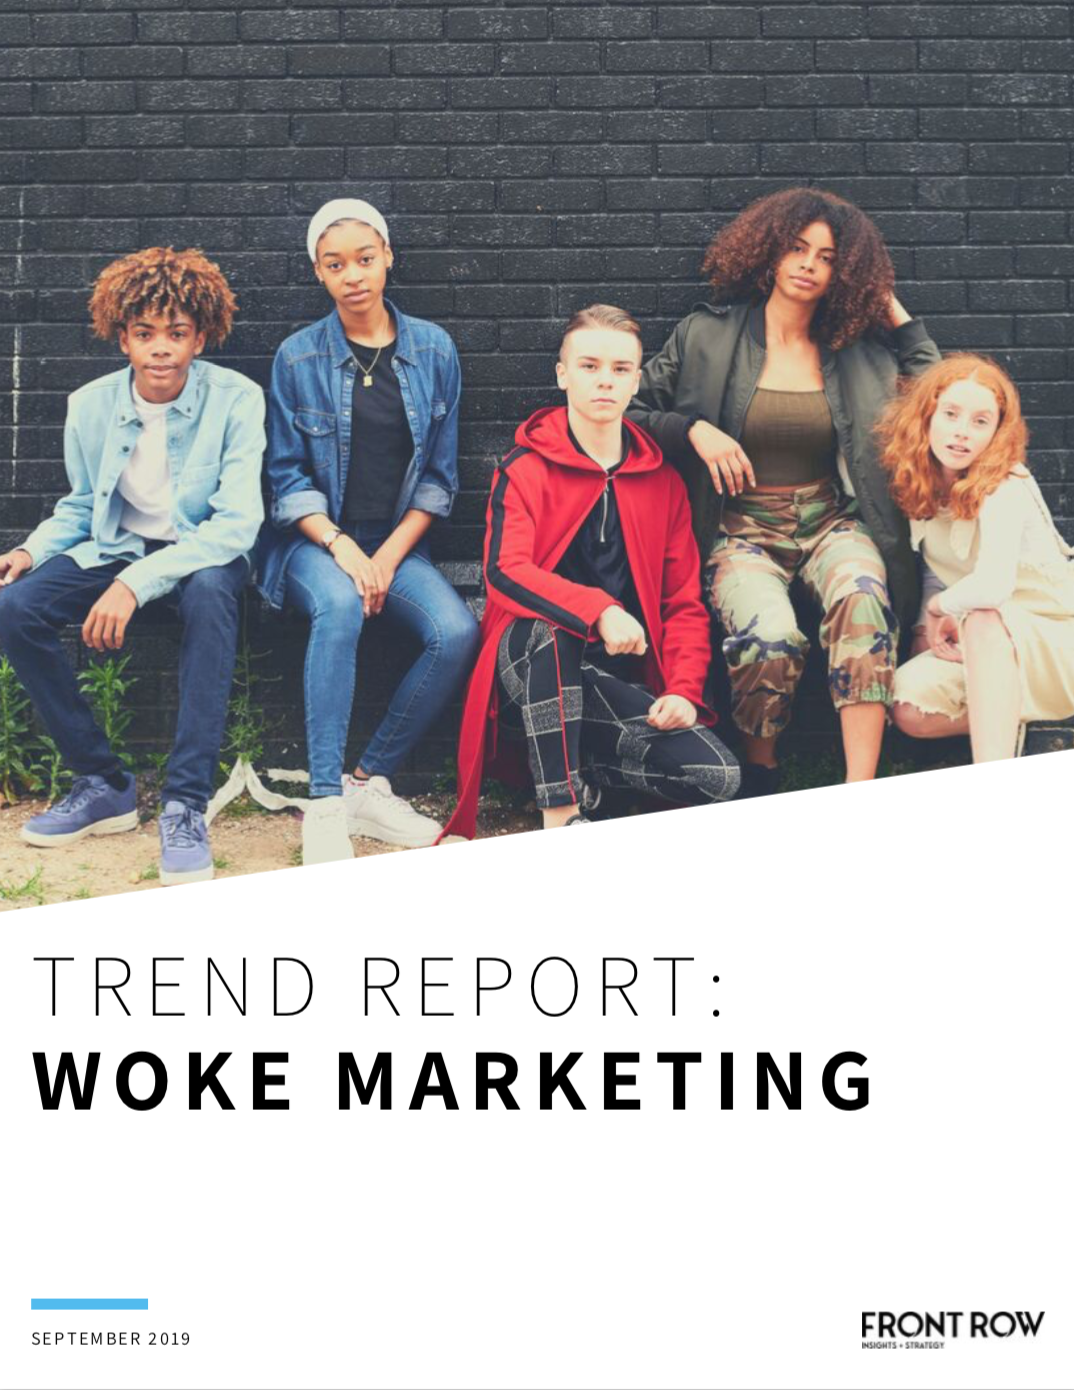 Woke Marketing is the latest trend brands need to to